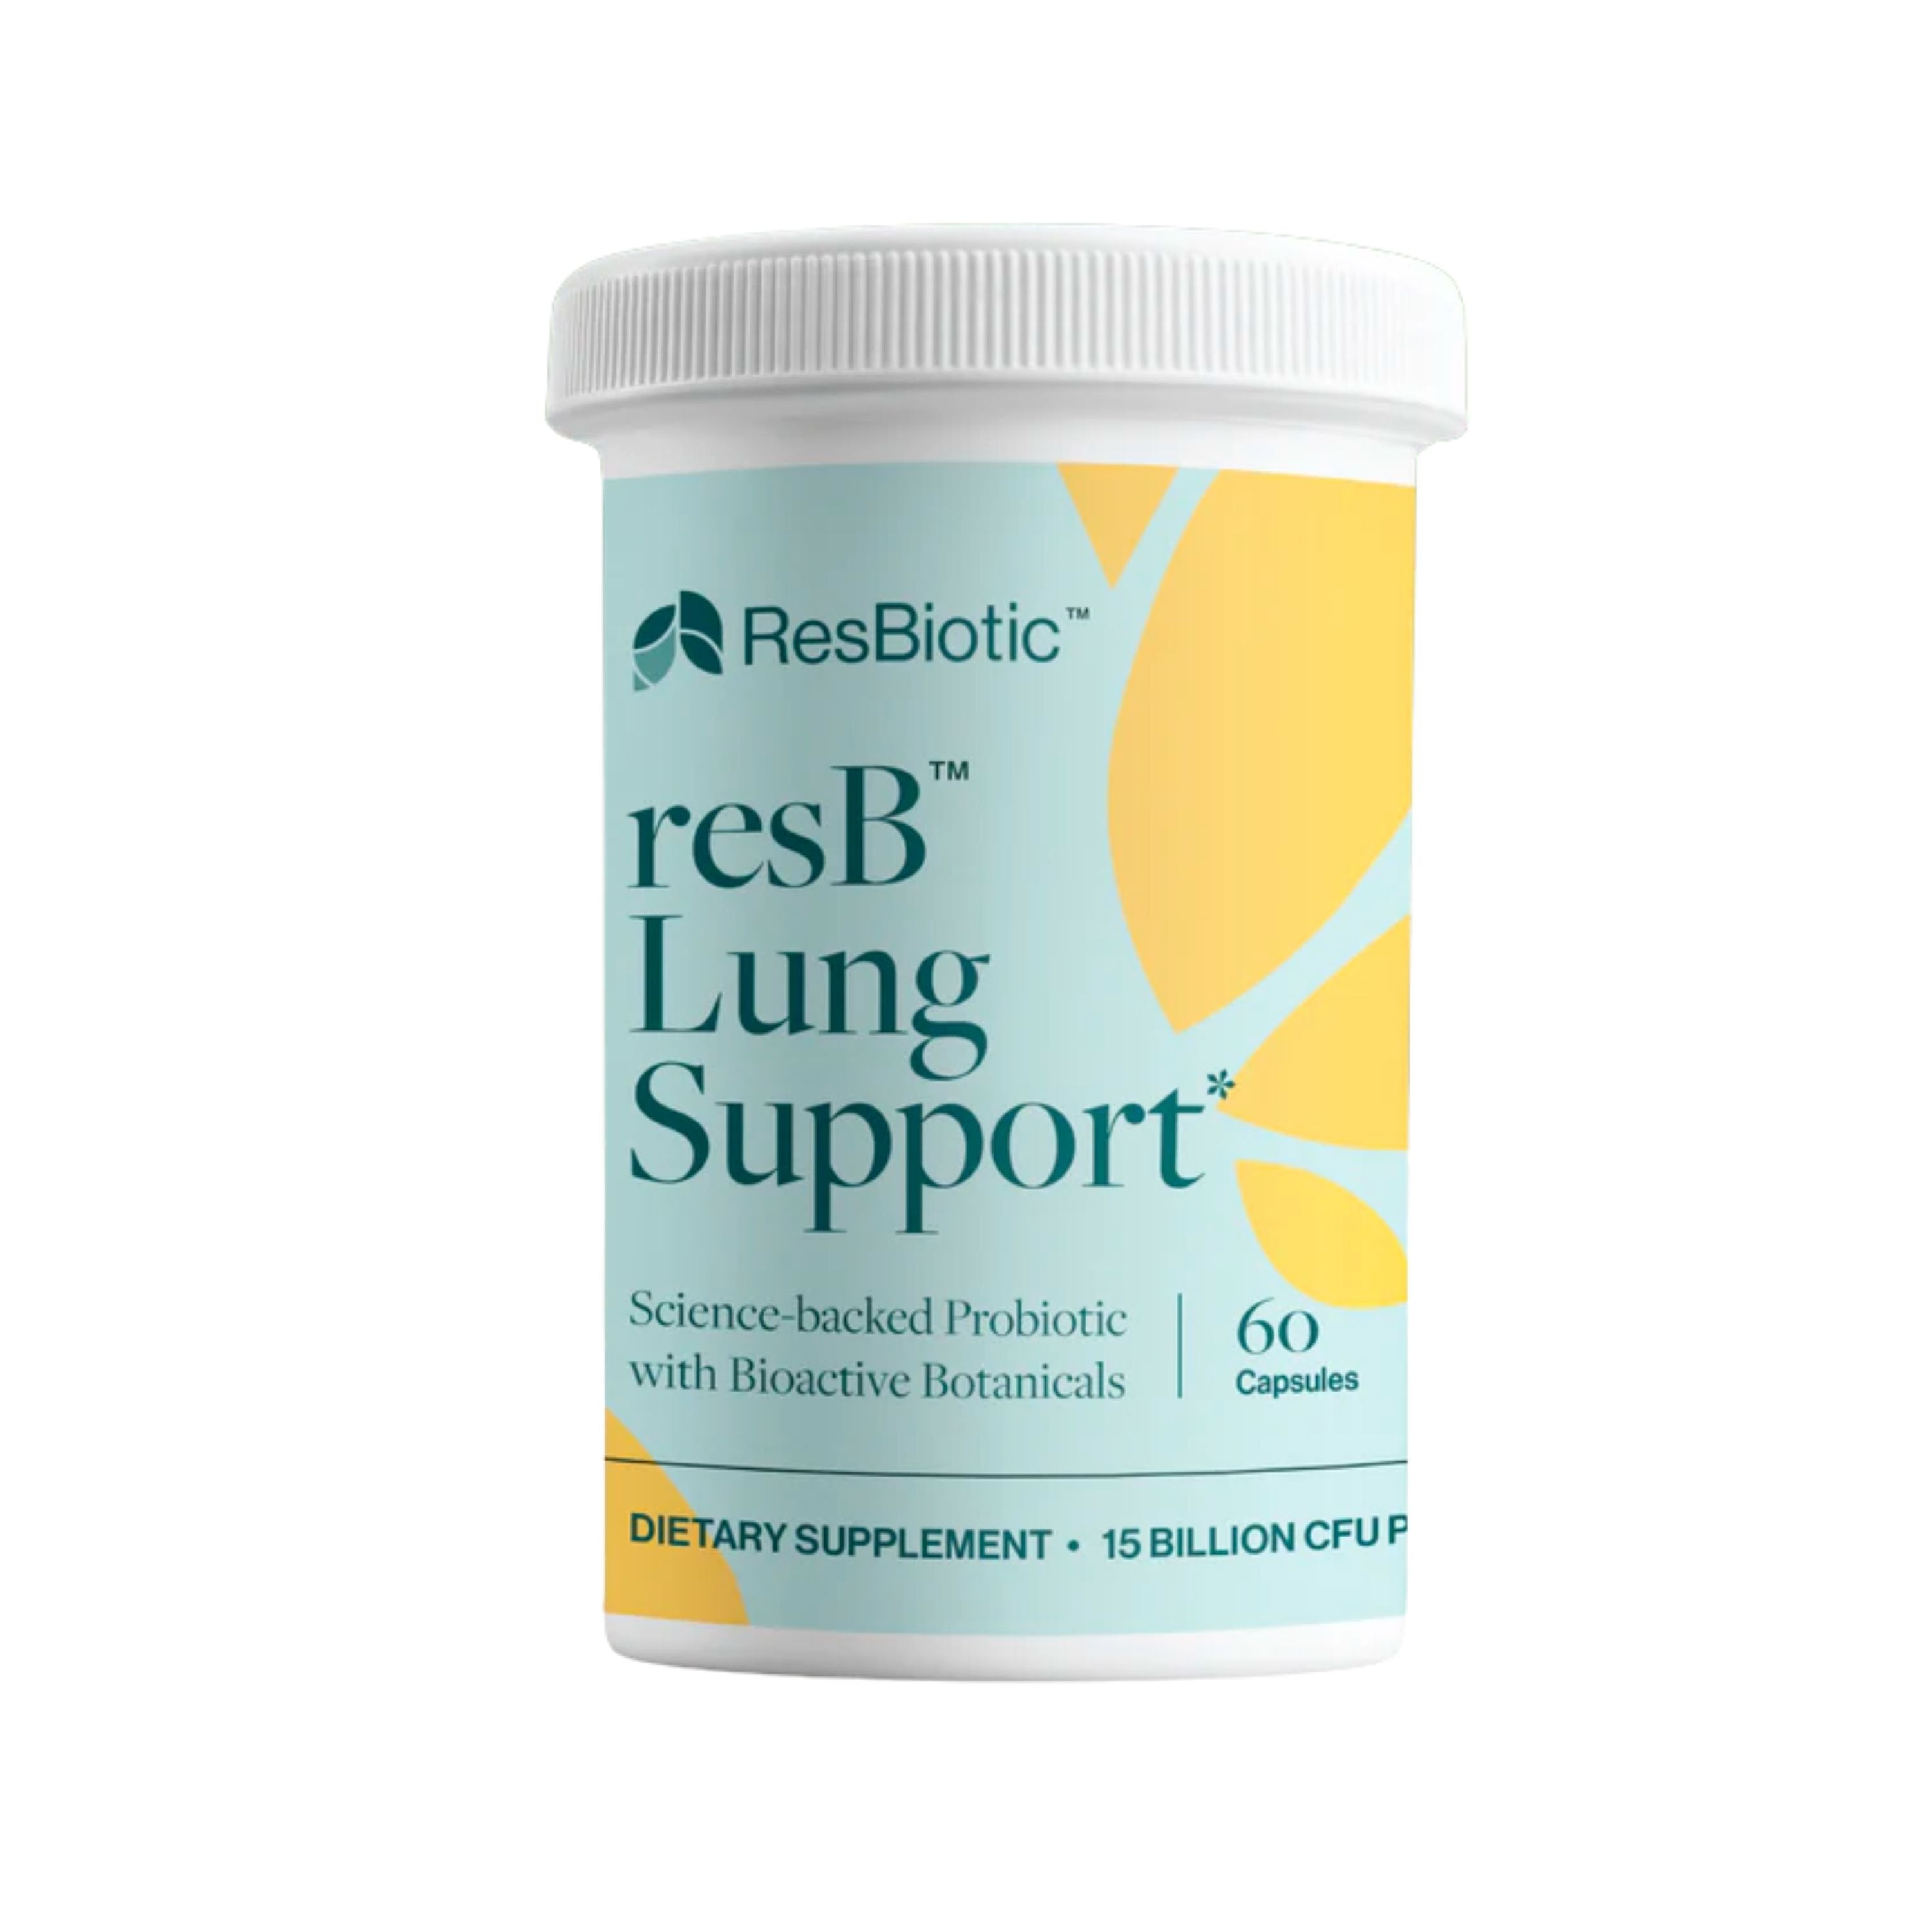 ResBiotic resB Lung Support – Probiotics for Lung Health for Women & Men – Doctor Formulated, Science Backed, Supports Digestion, Immune Function, and Lung Health with Bioactive Botanicals – 60 Capsules per Bottle